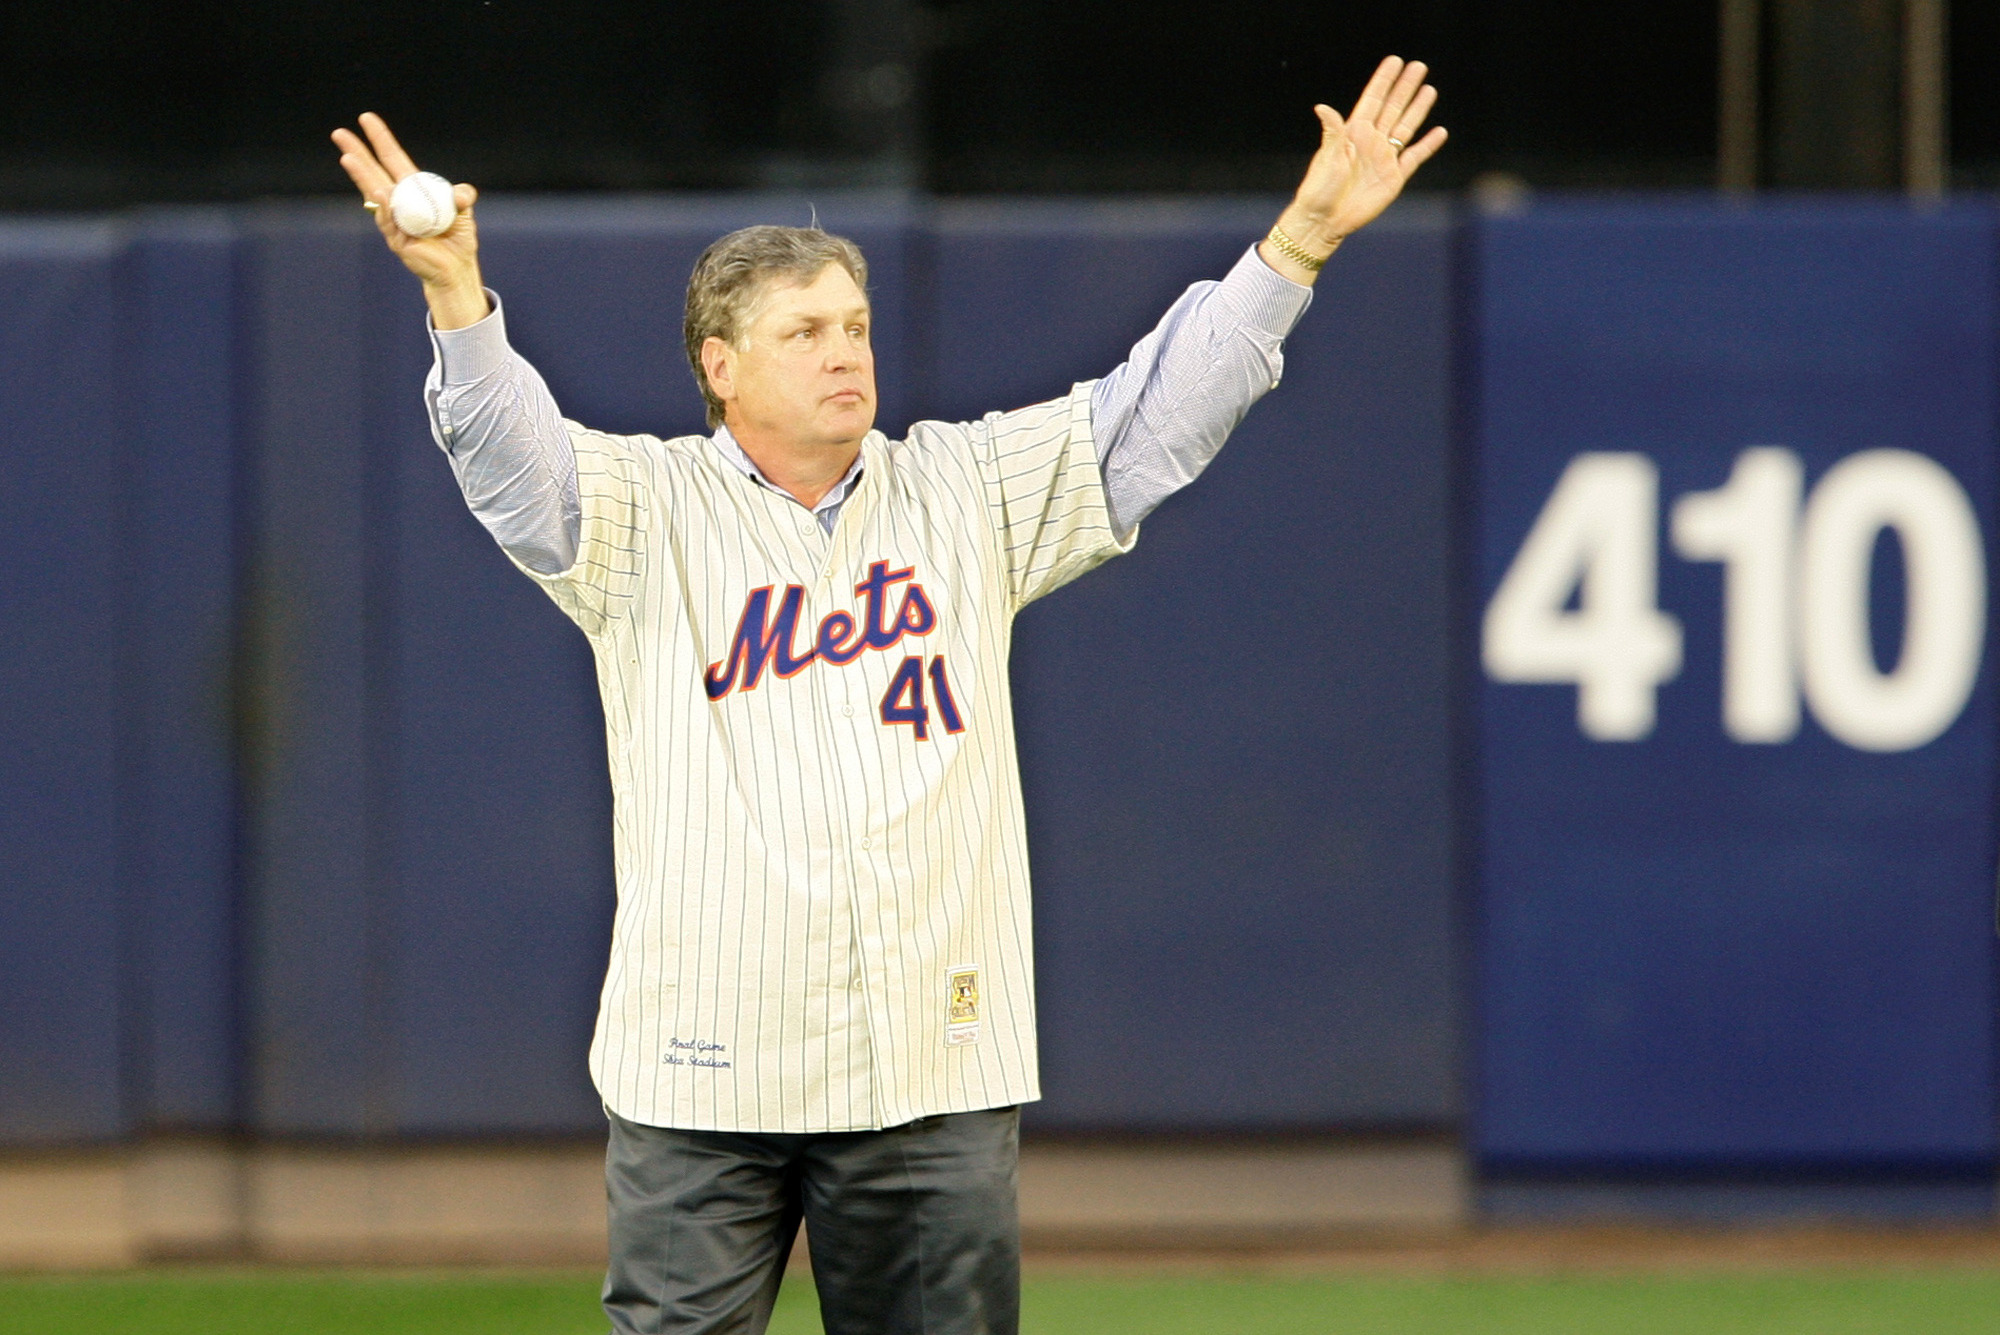 Tom Seaver, Hall of Fame pitcher and New York Mets icon, dies at 75